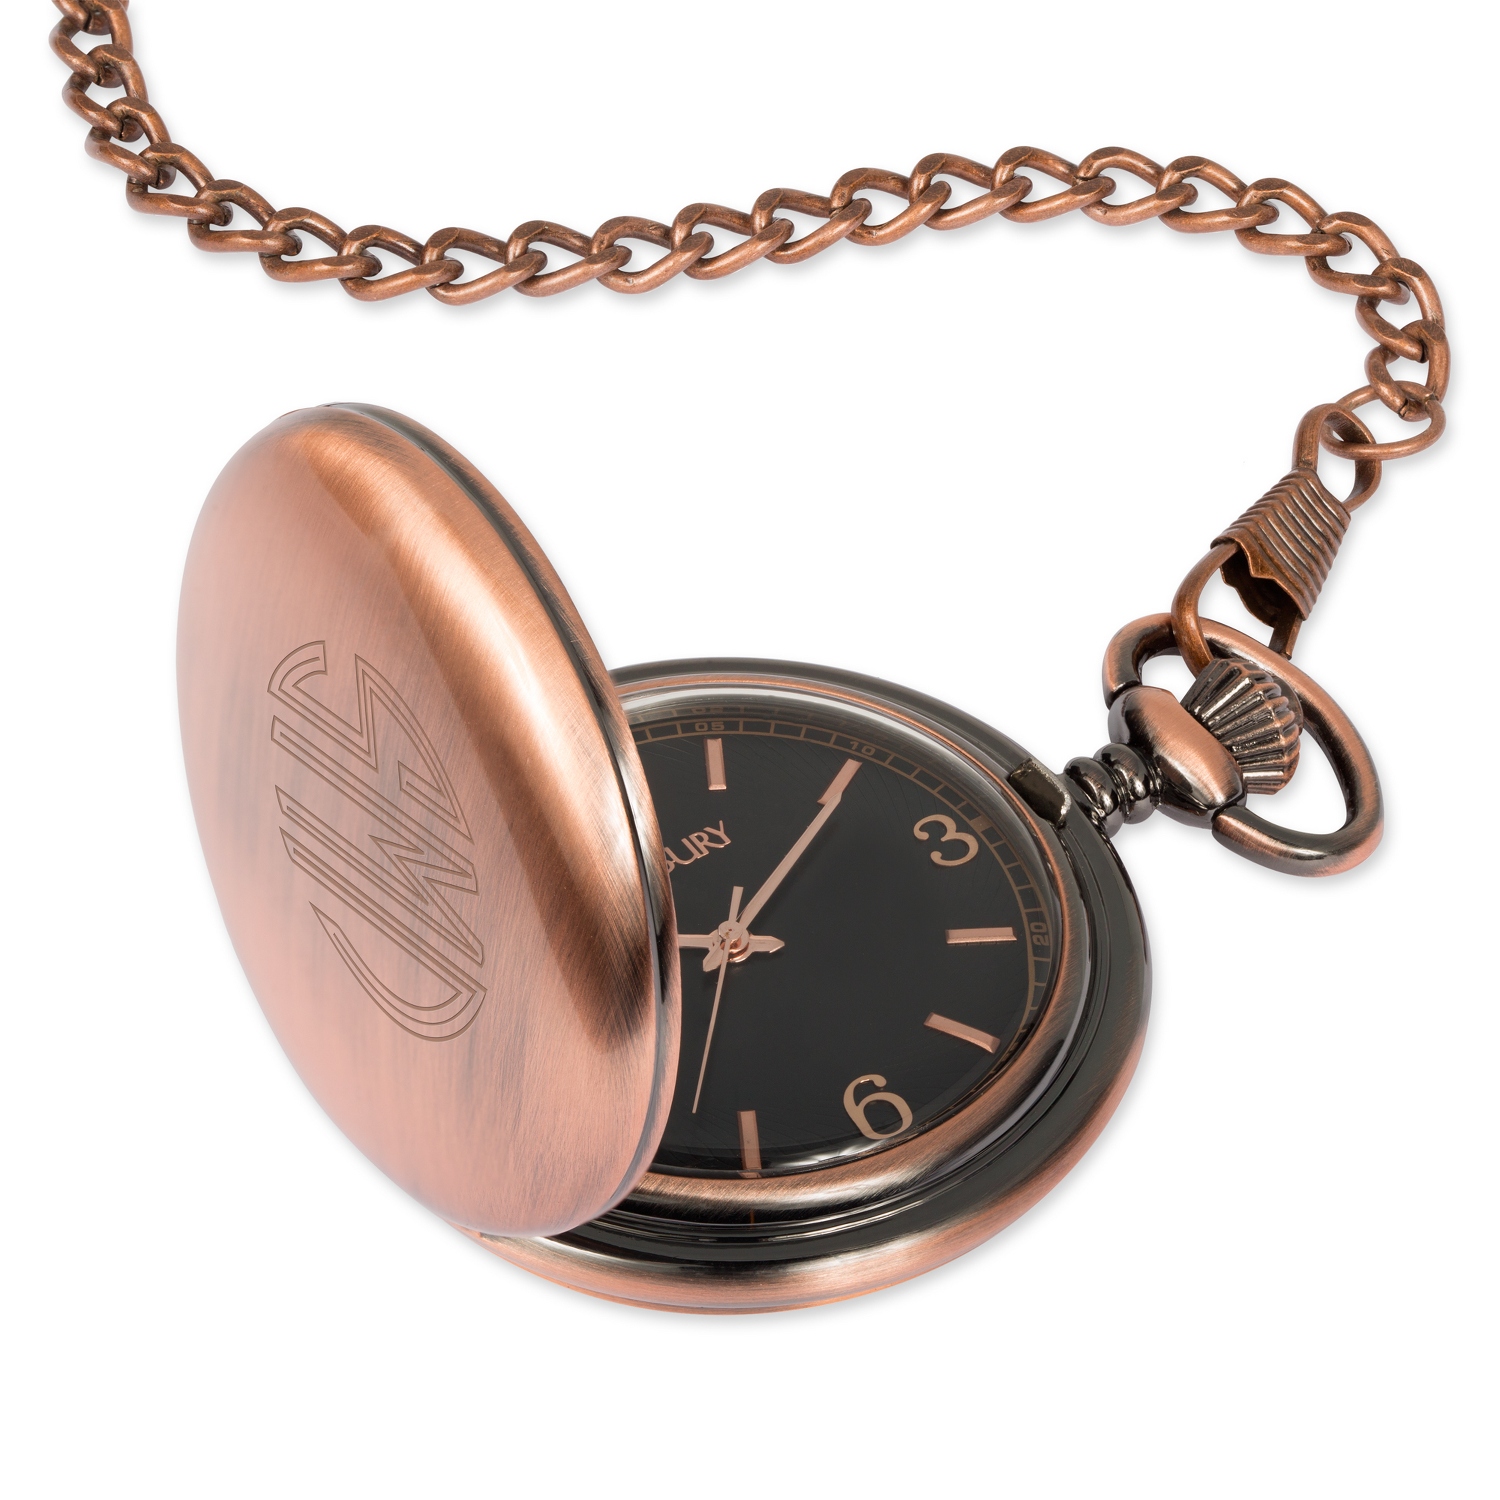 Engraved Pocket Watches at Things Remembered